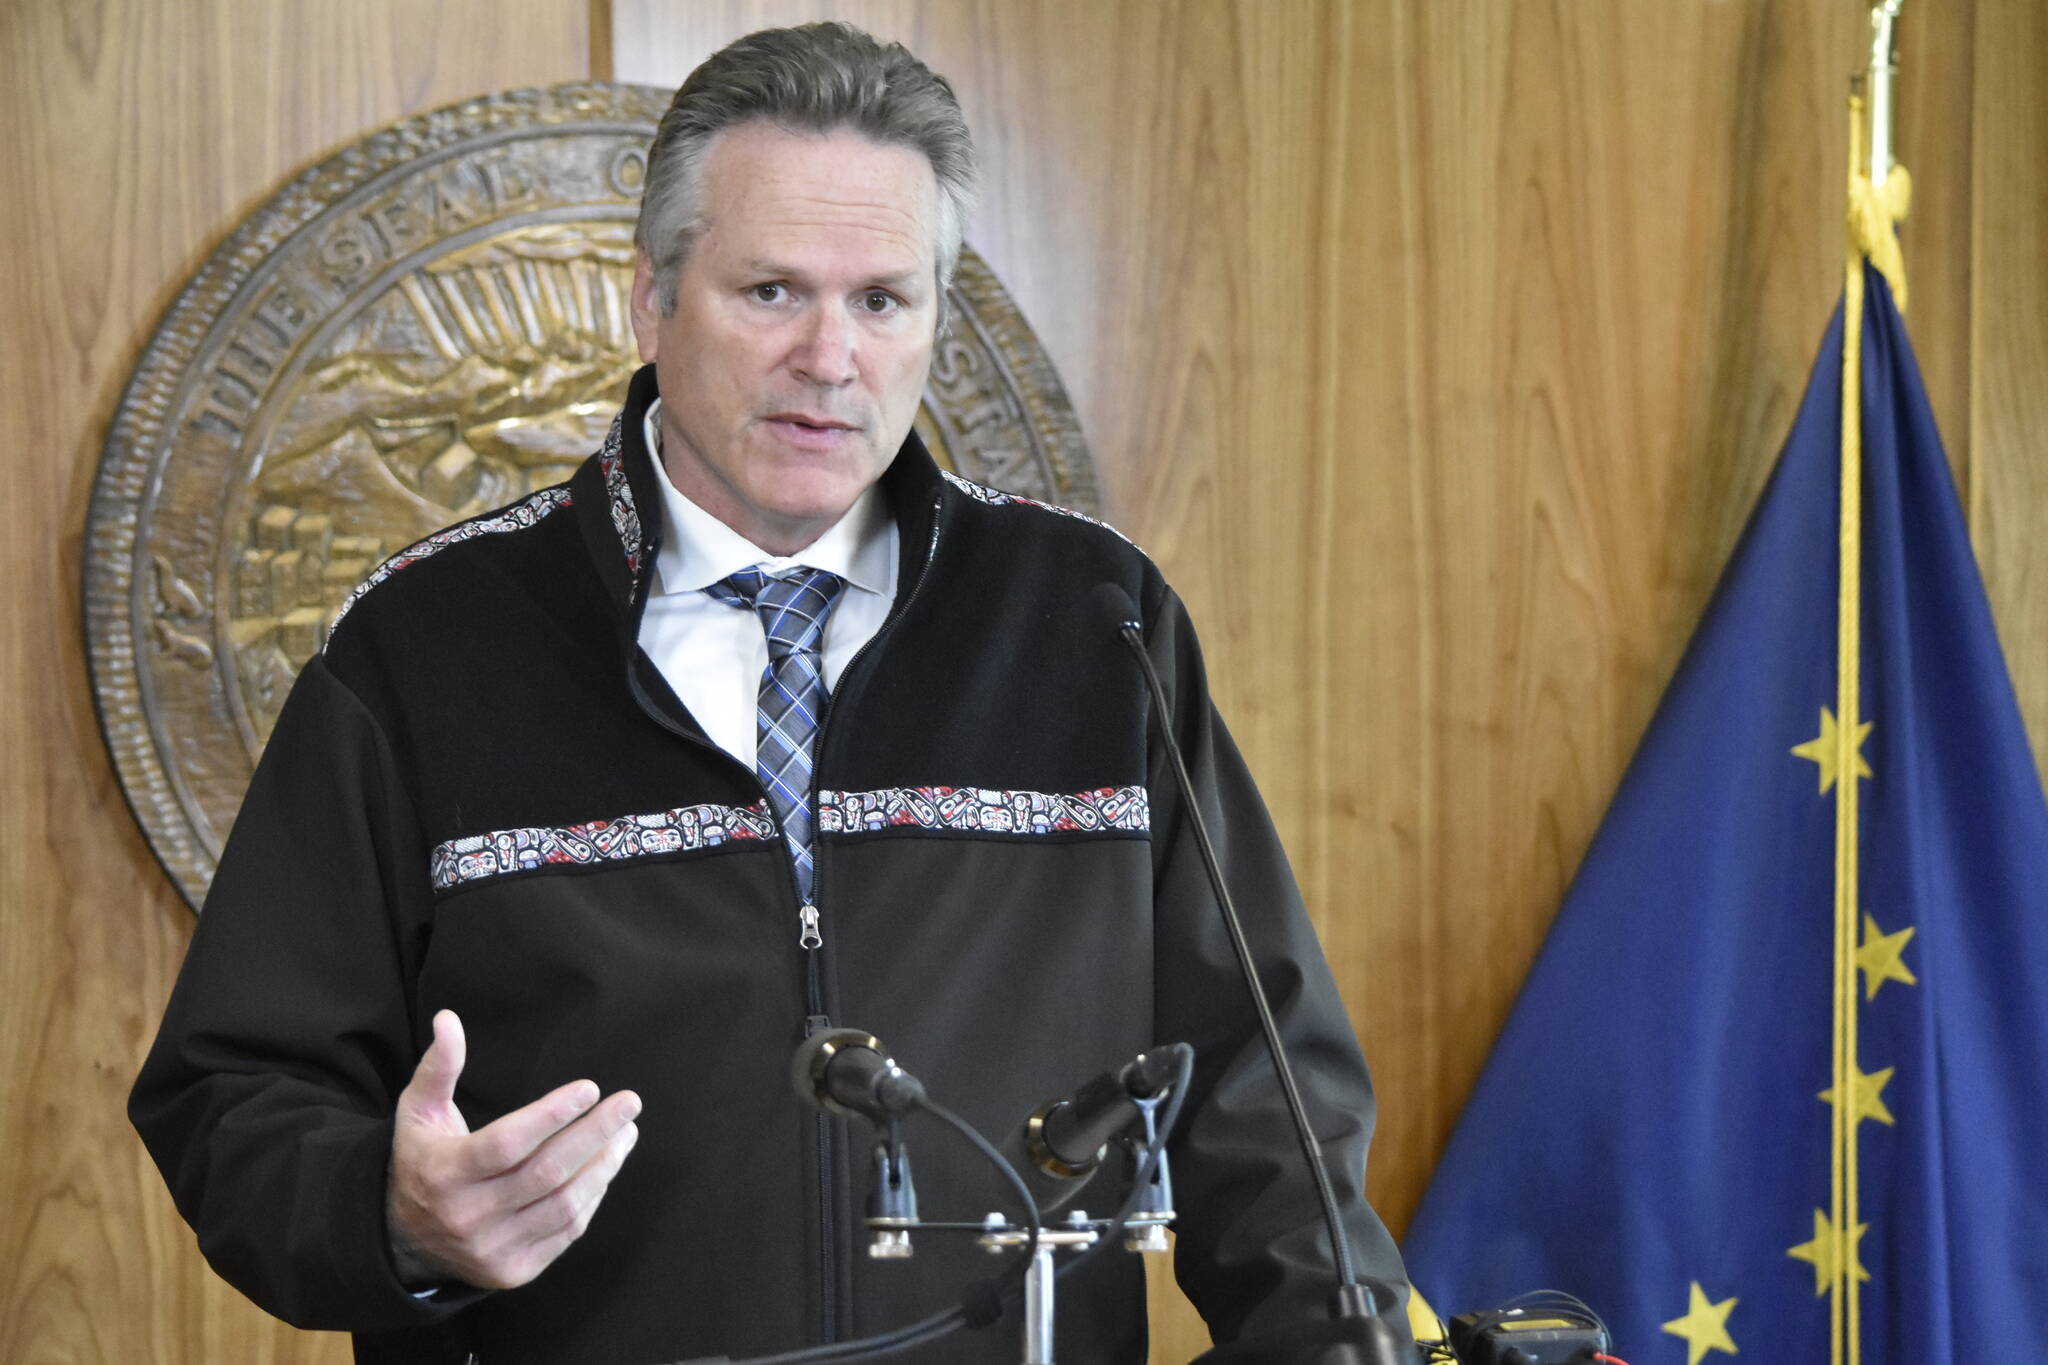 Gov. Mike Dunleavy is seen here at an Aug. 16, 2021 news conference. (Peter Segall / Juneau Empire file)